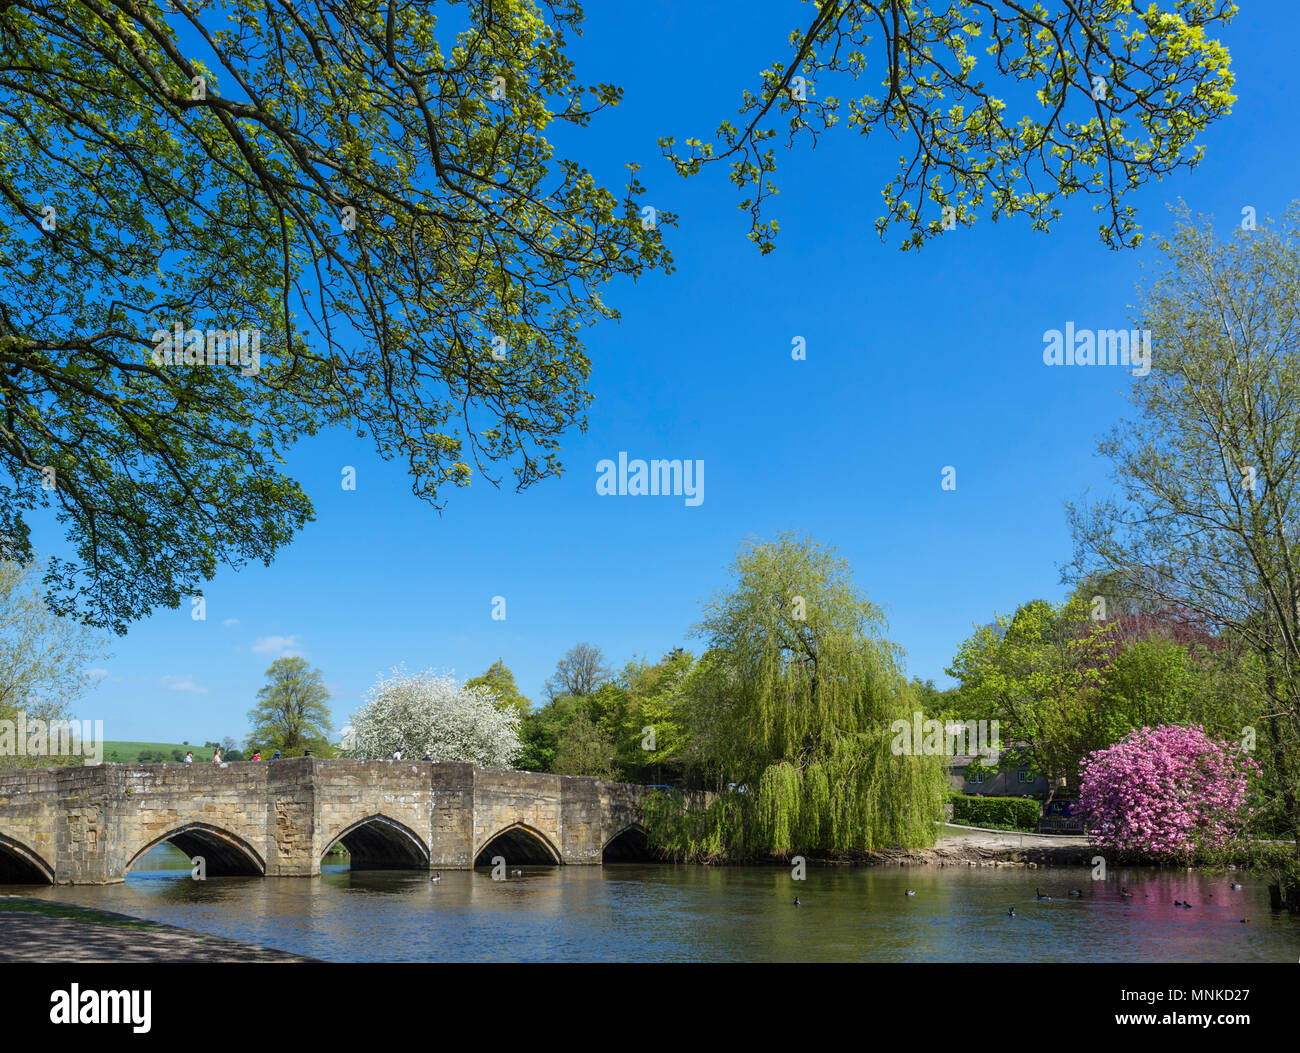 Historic 13th century bridge over the River Wye in Bakewell, Derbyshire, England, UK Stock Photo